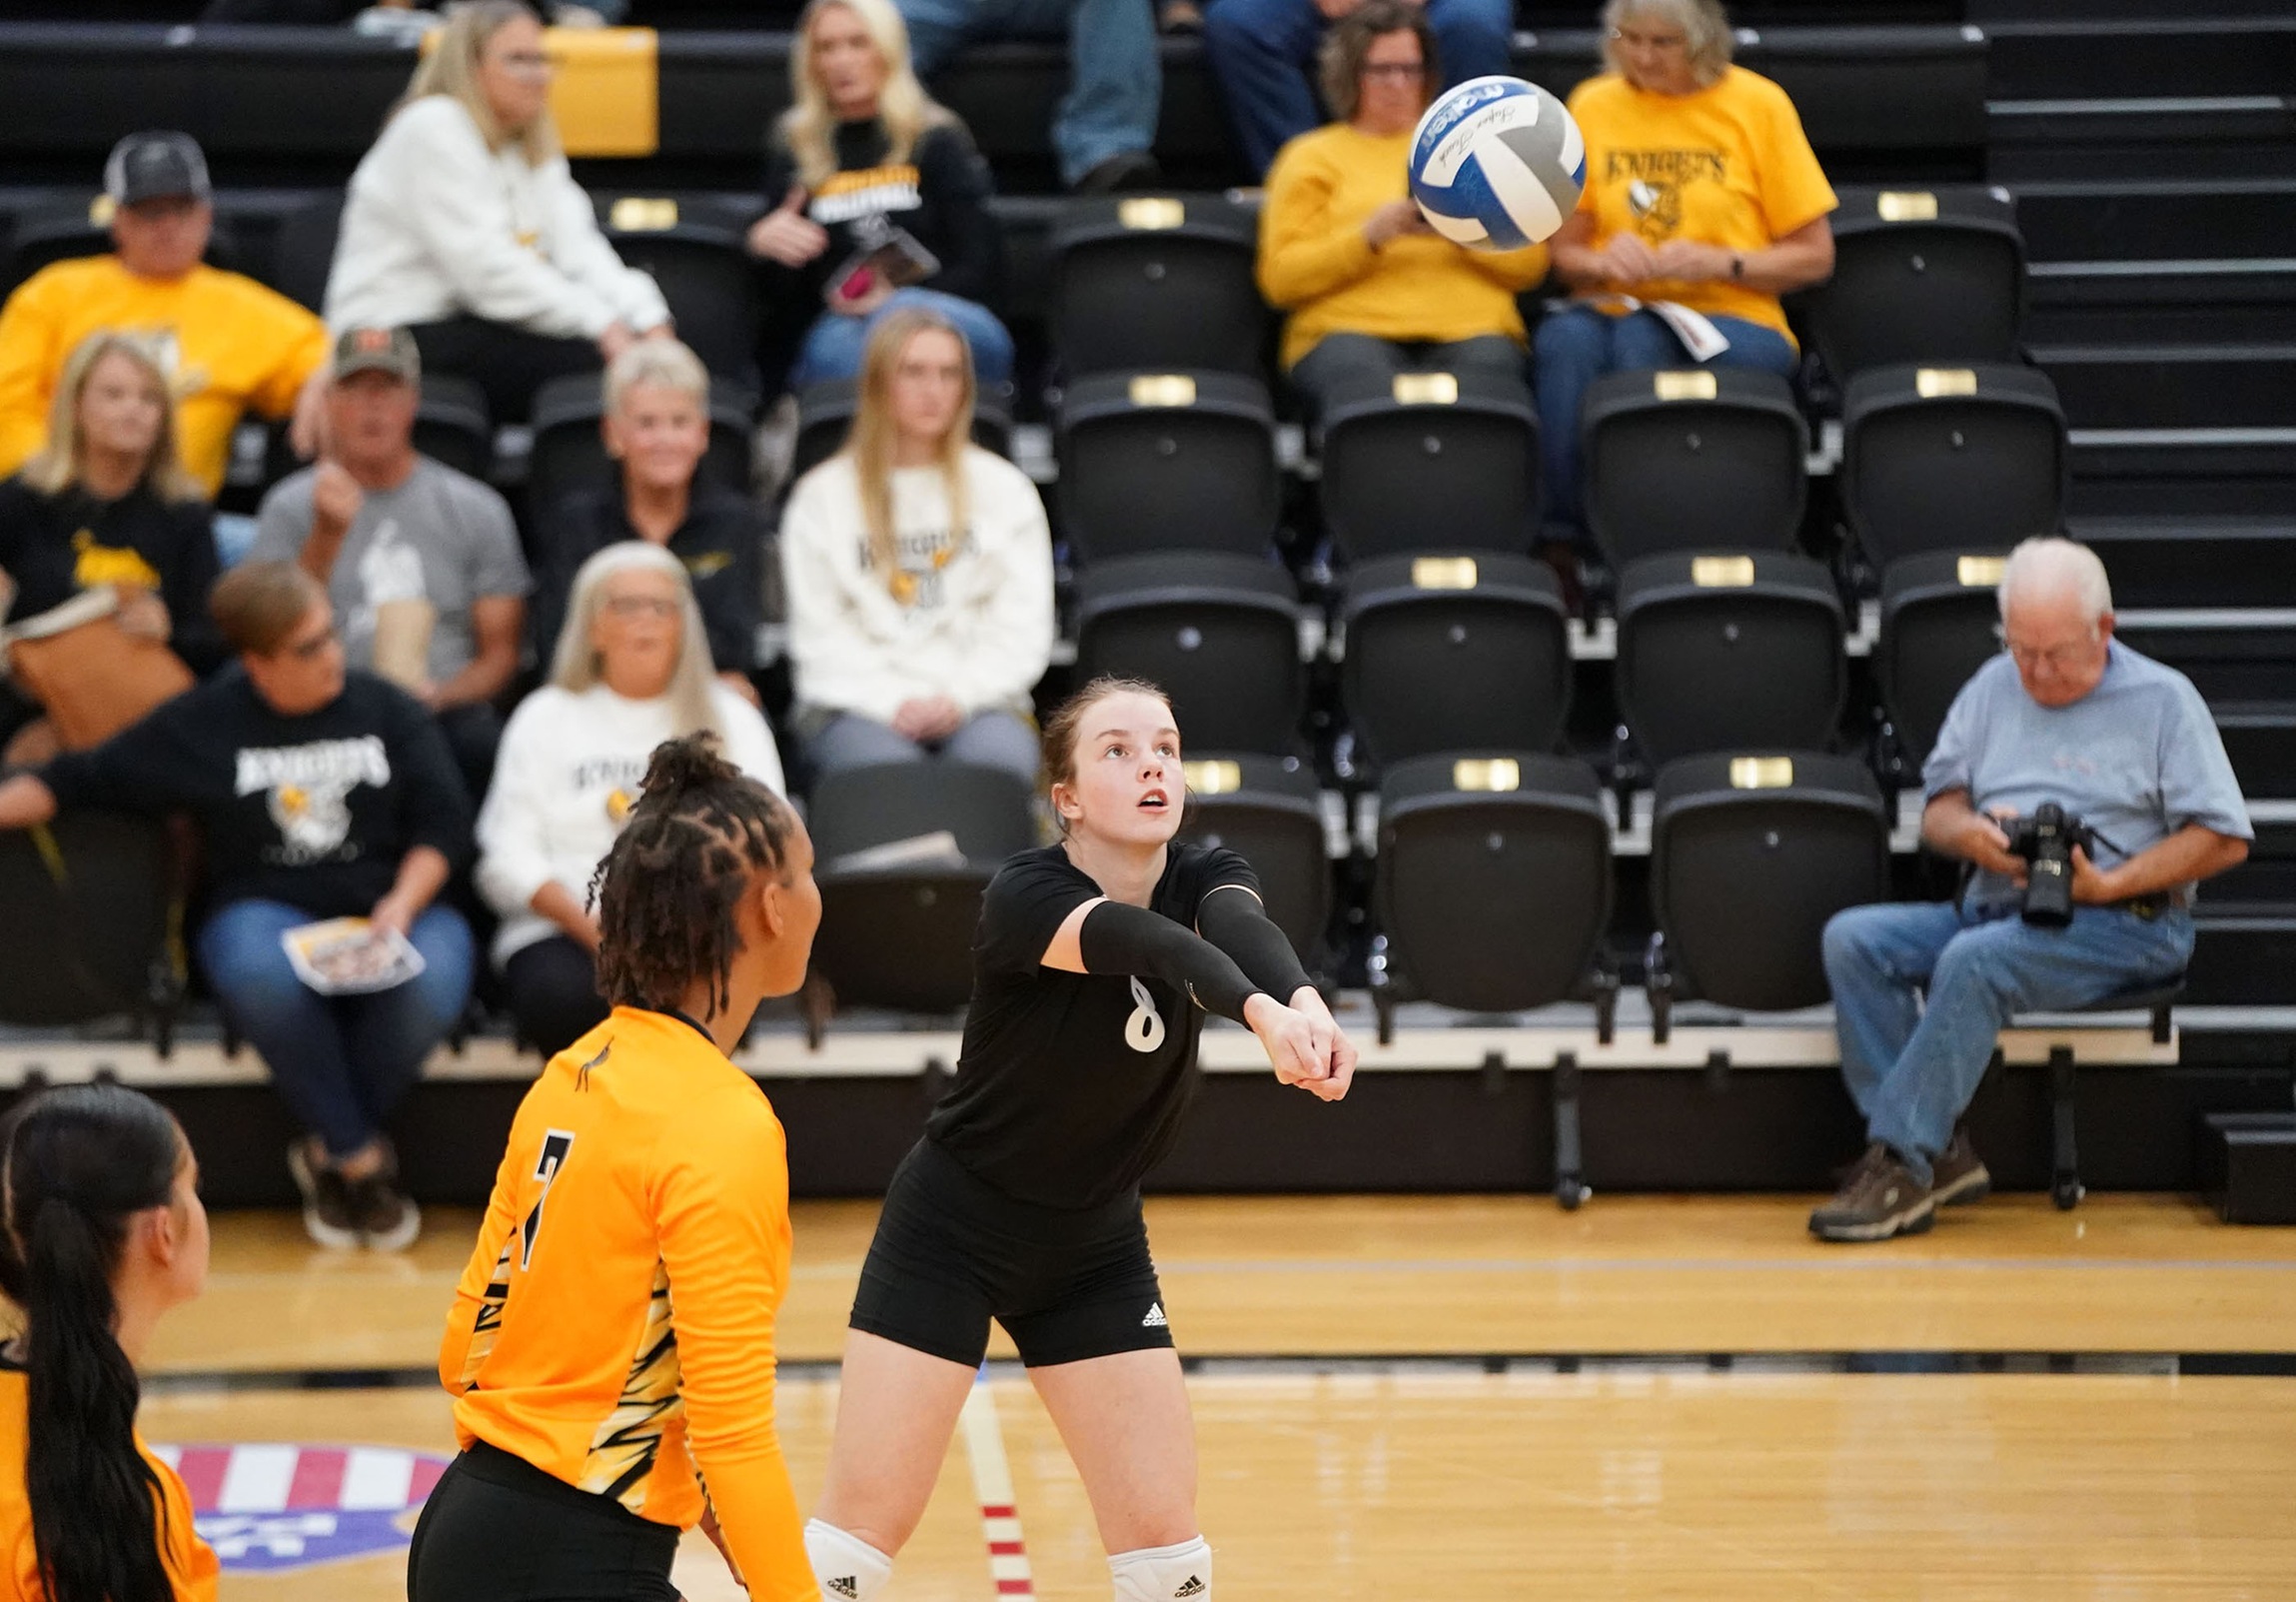 Knights Volleyball rounds out tourney with double sweep